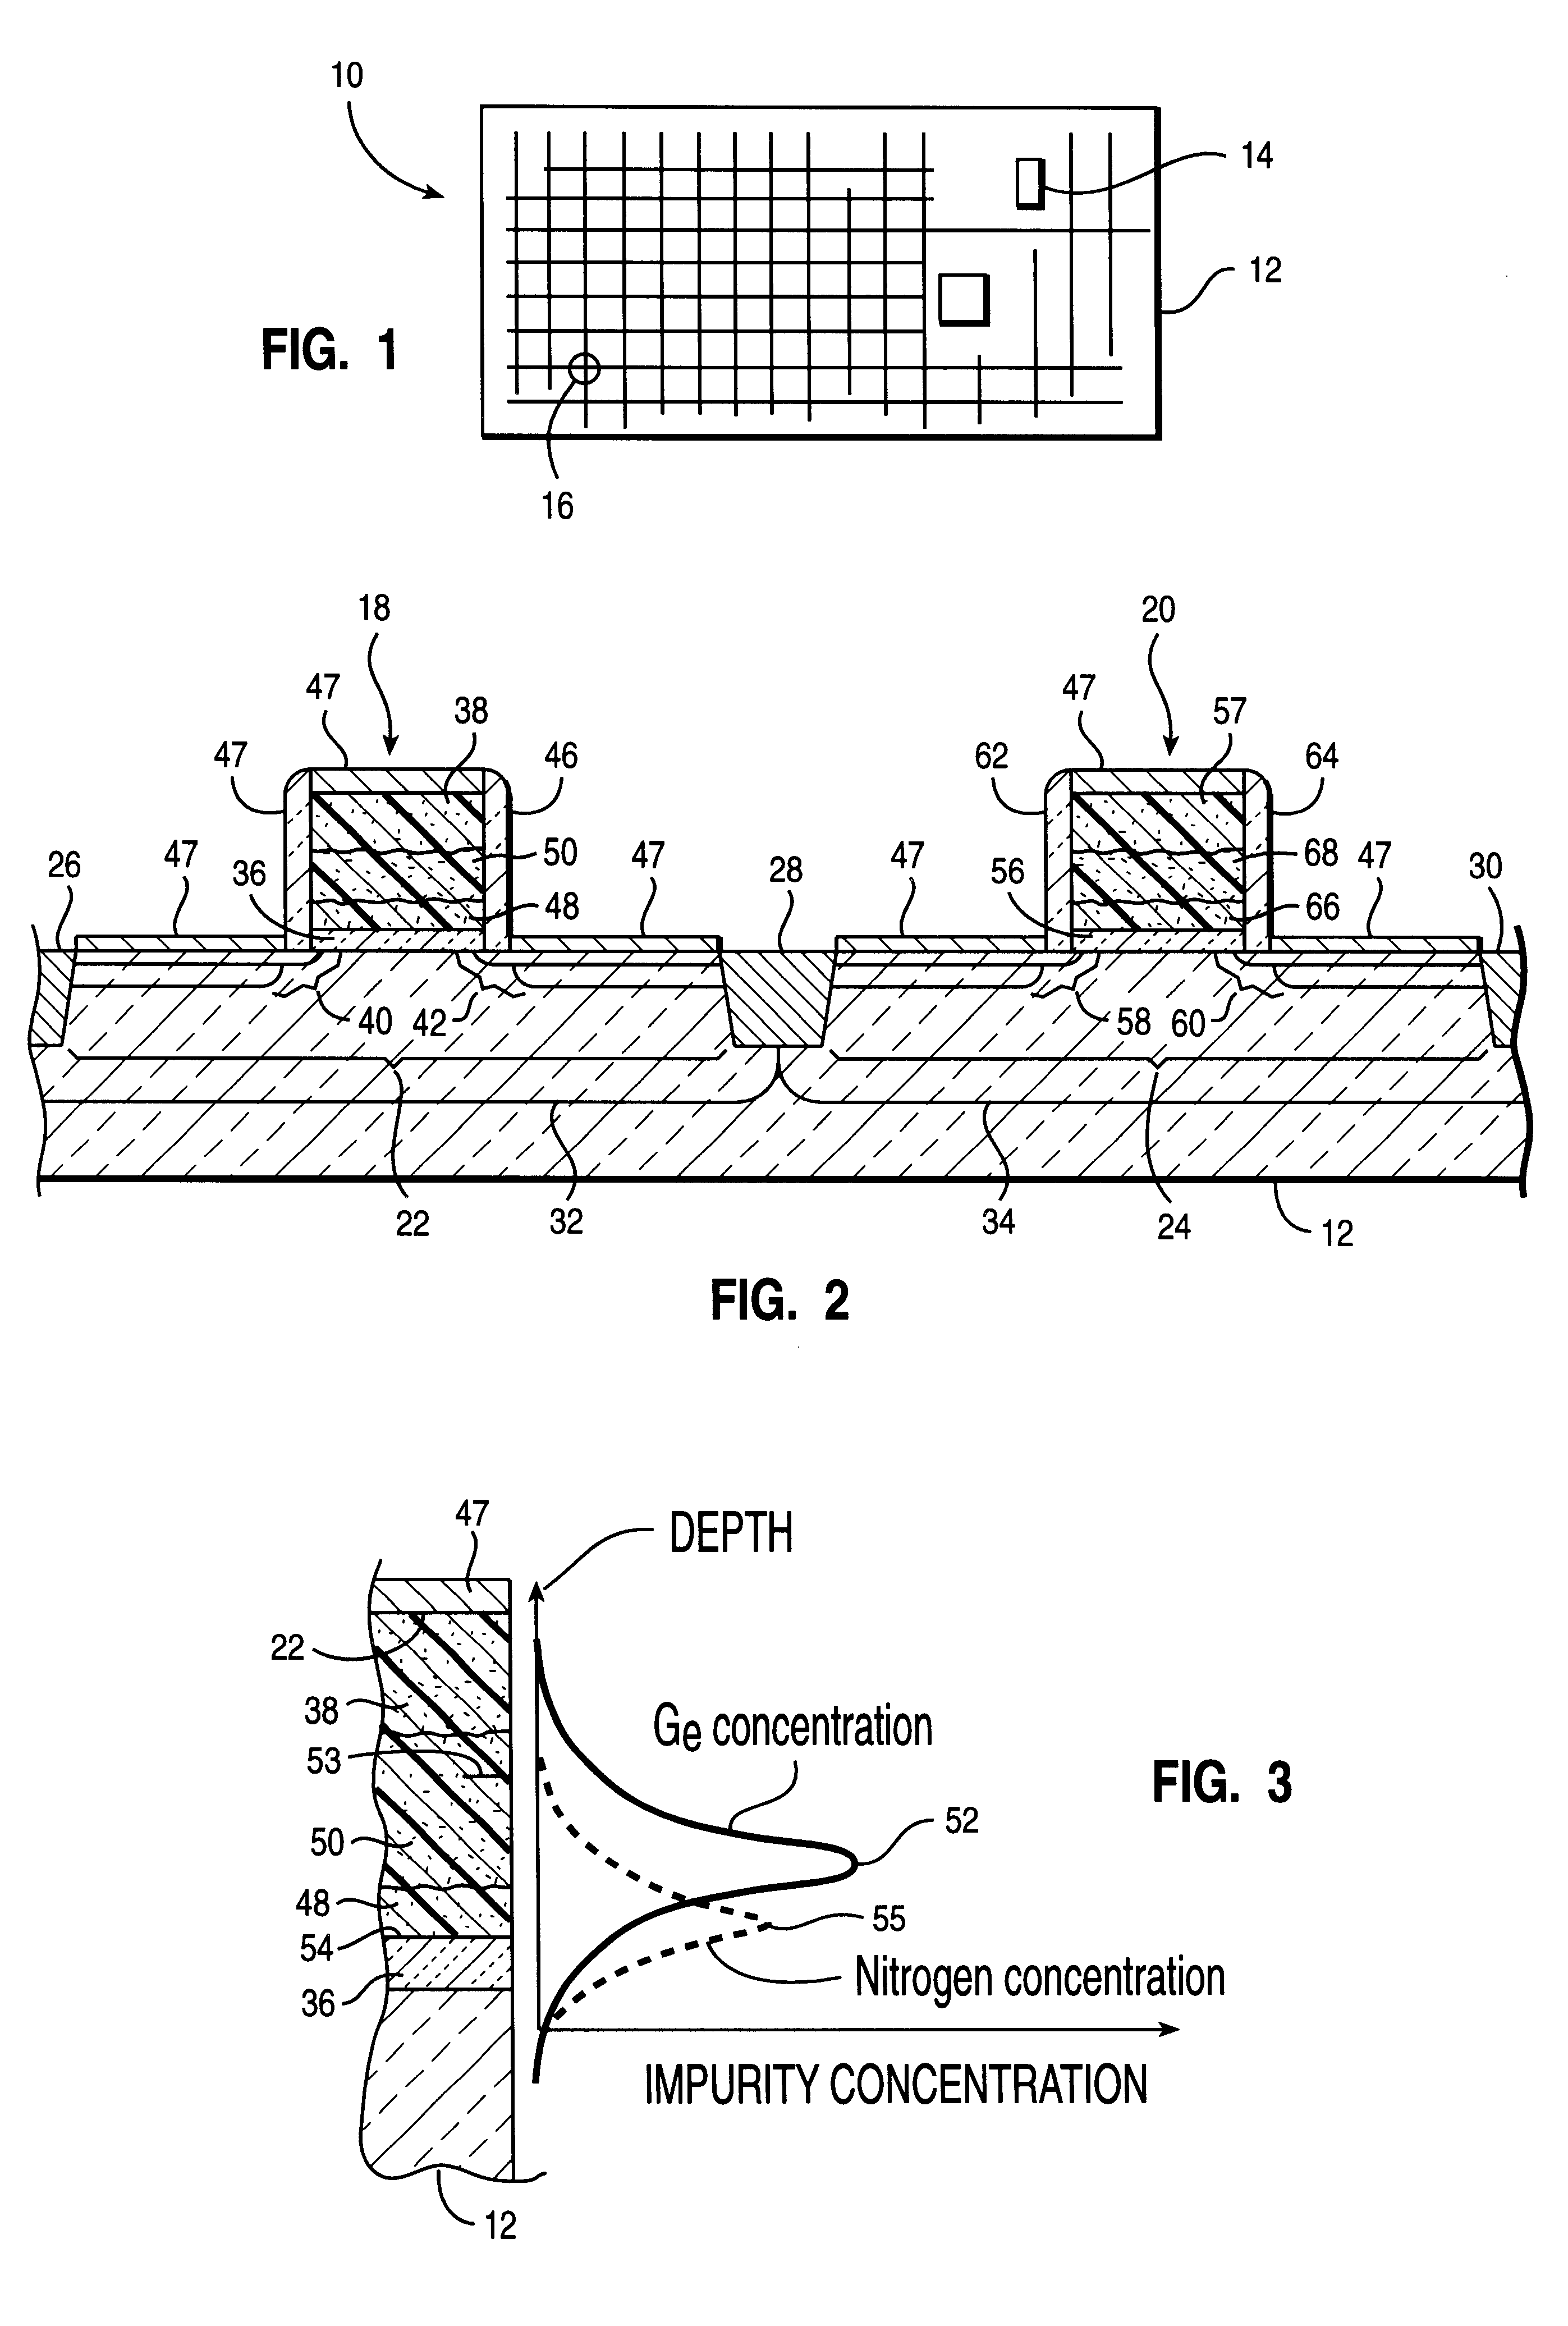 CMOS transistor design for shared N+/P+ electrode with enhanced device performance